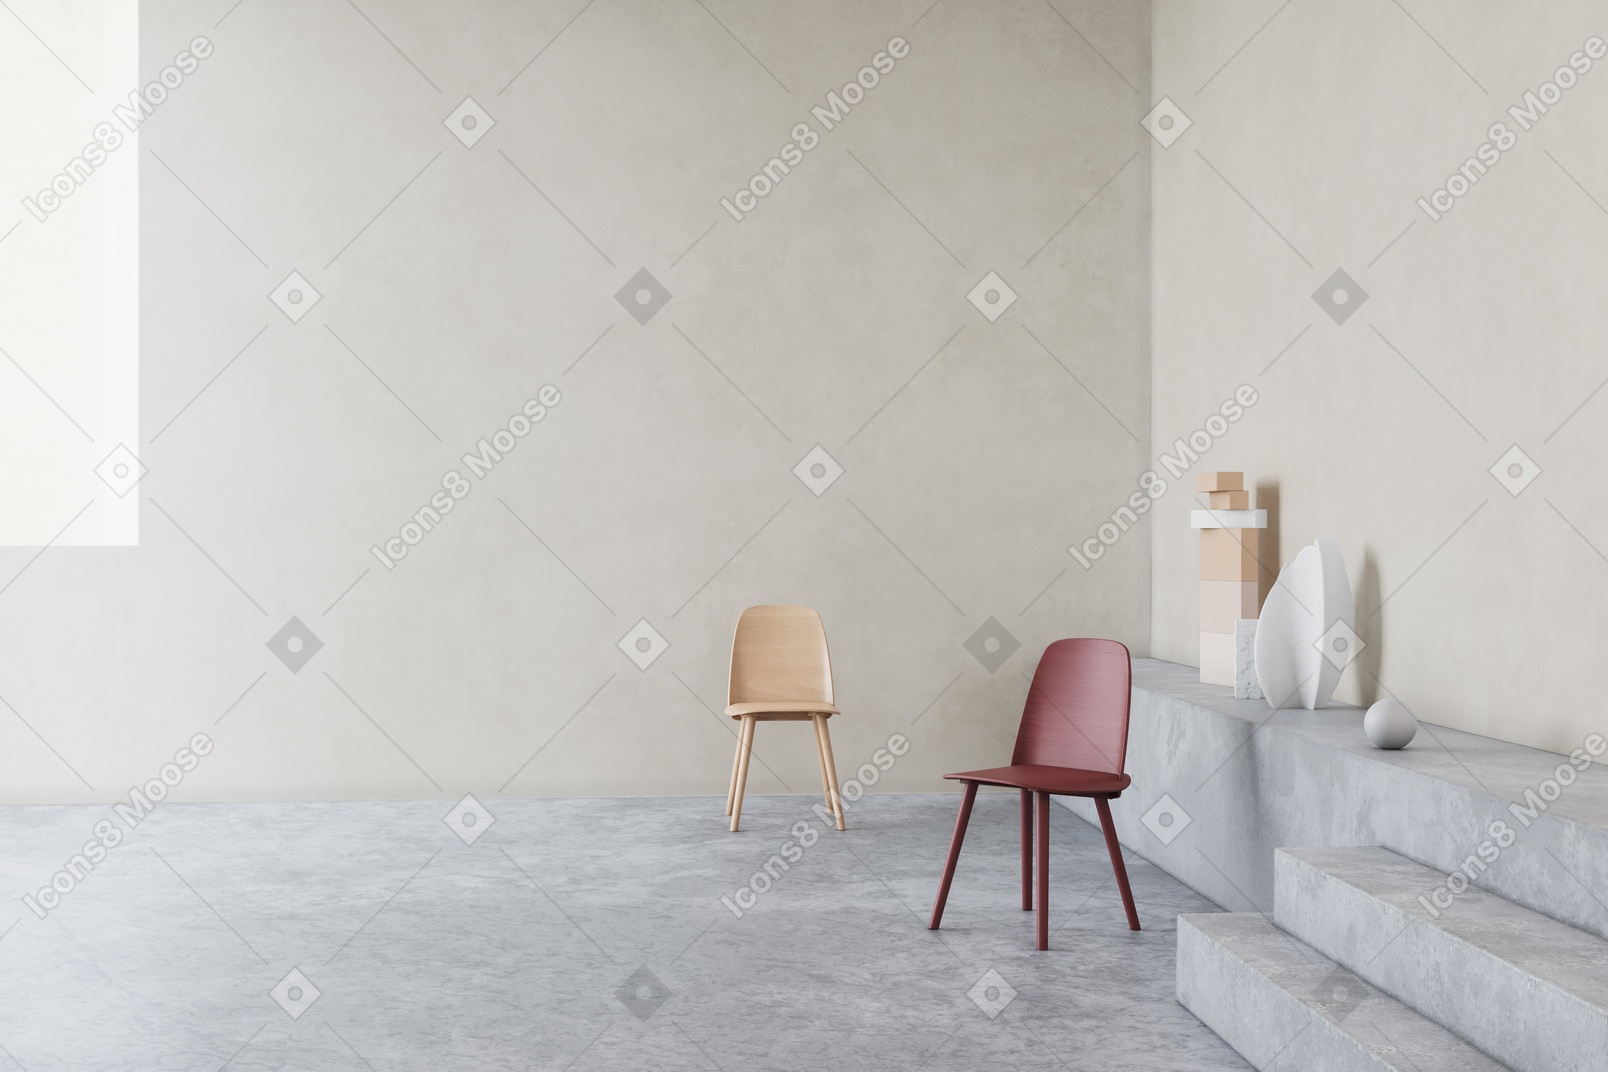 Two colorful chairs standing on a stone-like floor in a very grey minimalist room